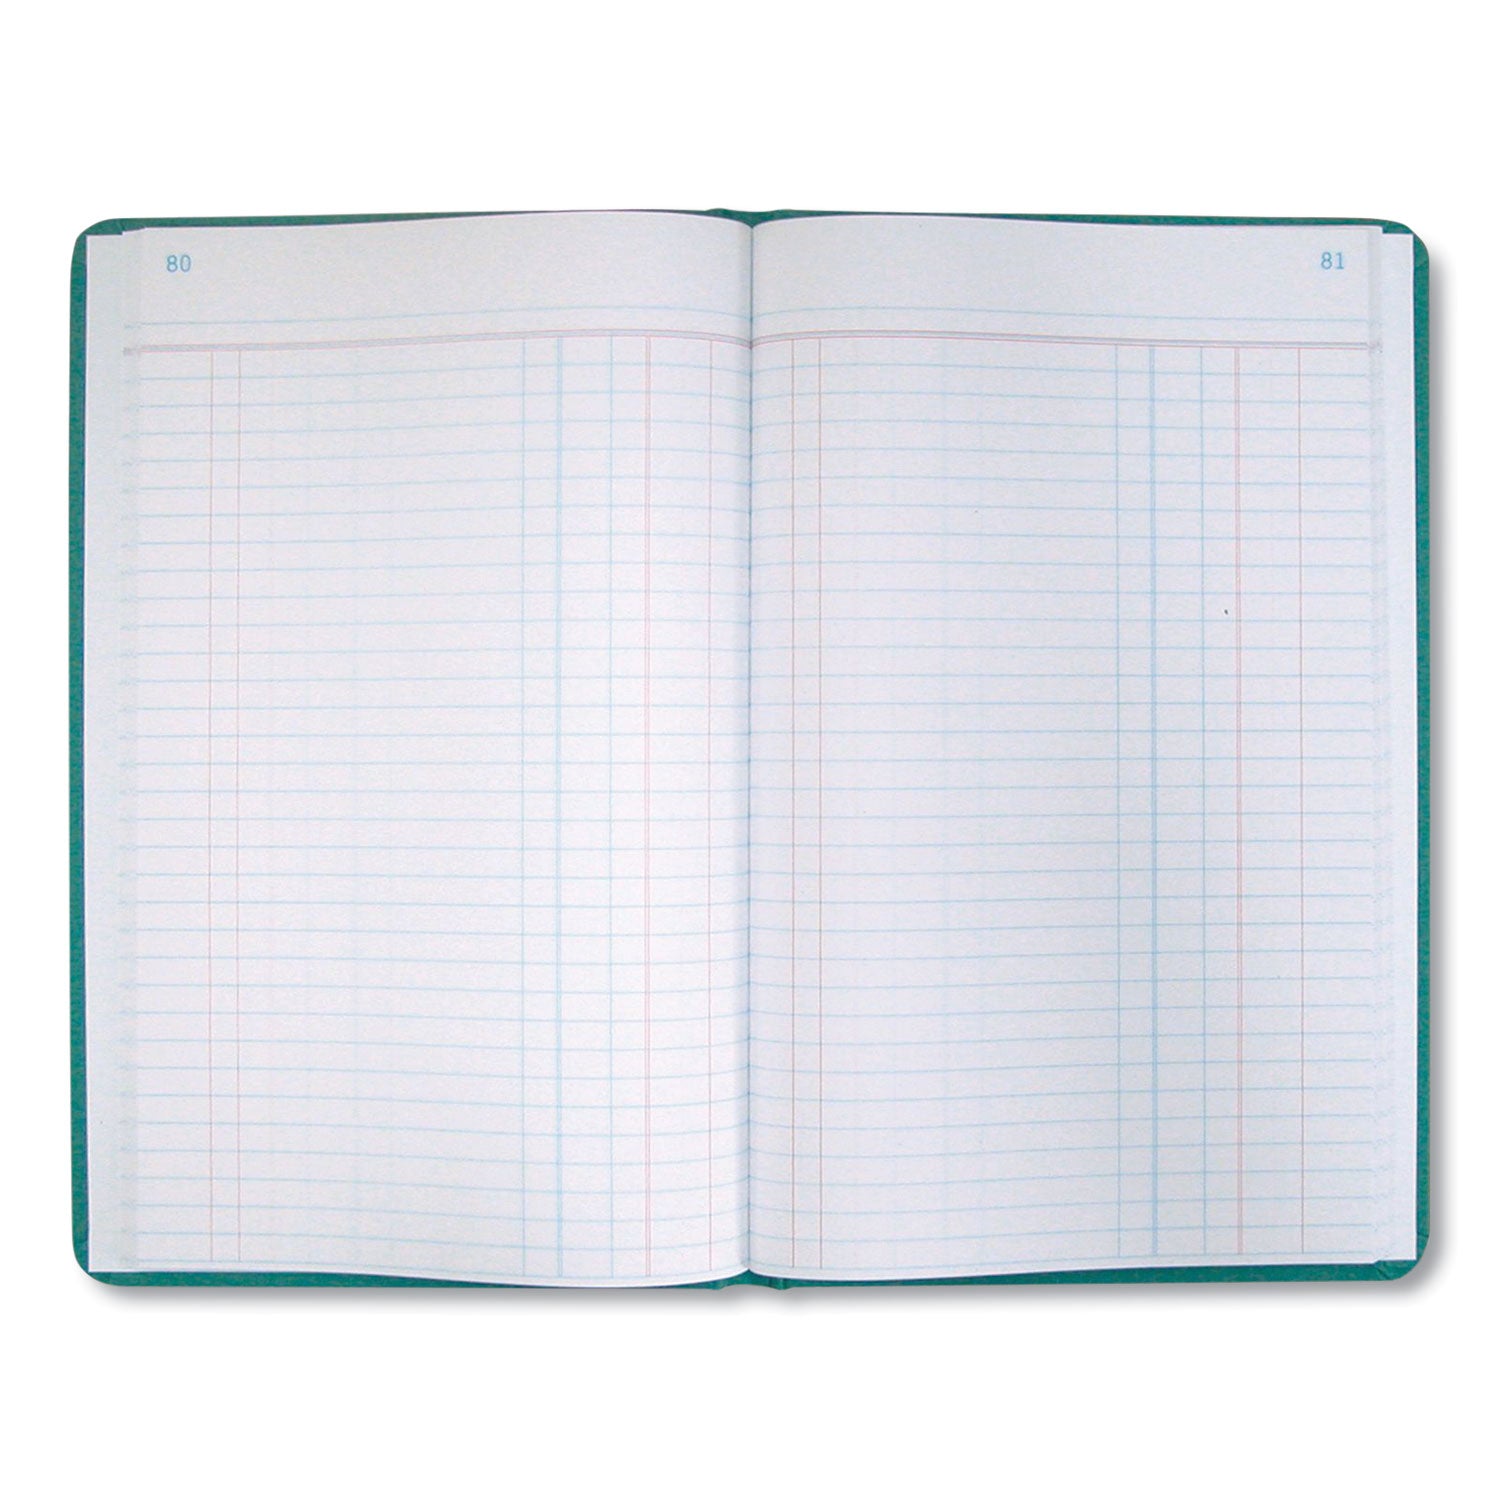 tuff-series-accounting-journal-single-page-8-column-accounting-format-green-cover-12-x-75-sheets-500-sheets-book_reda66500j - 3